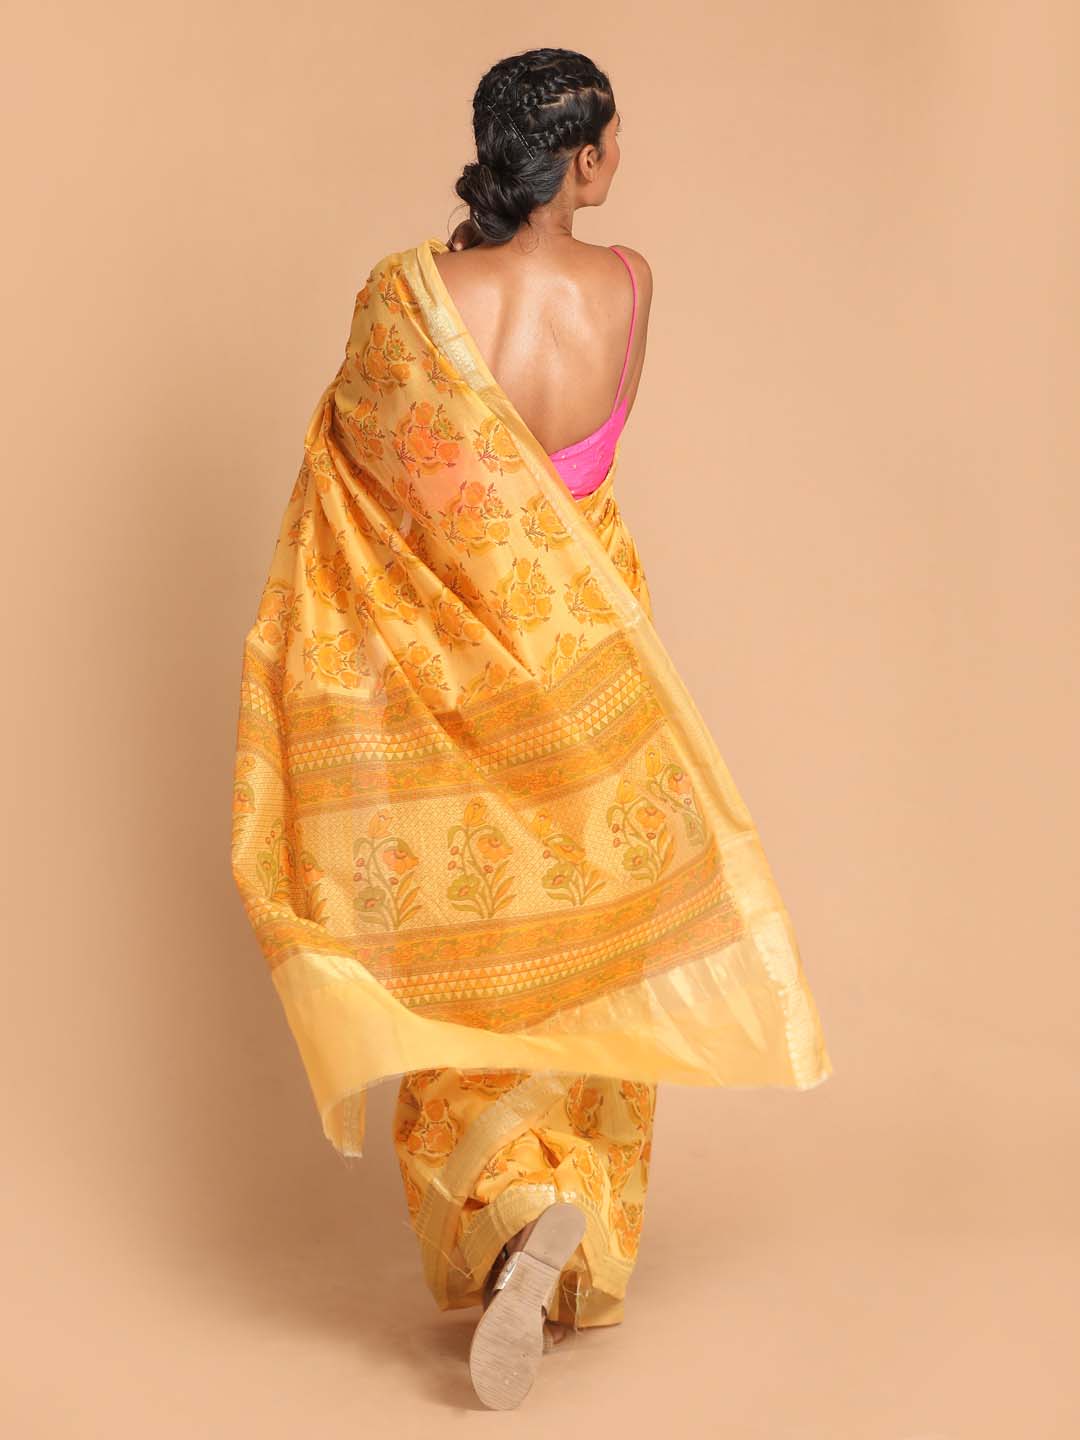 Indethnic Printed Cotton Blend Saree in Yellow - View 3